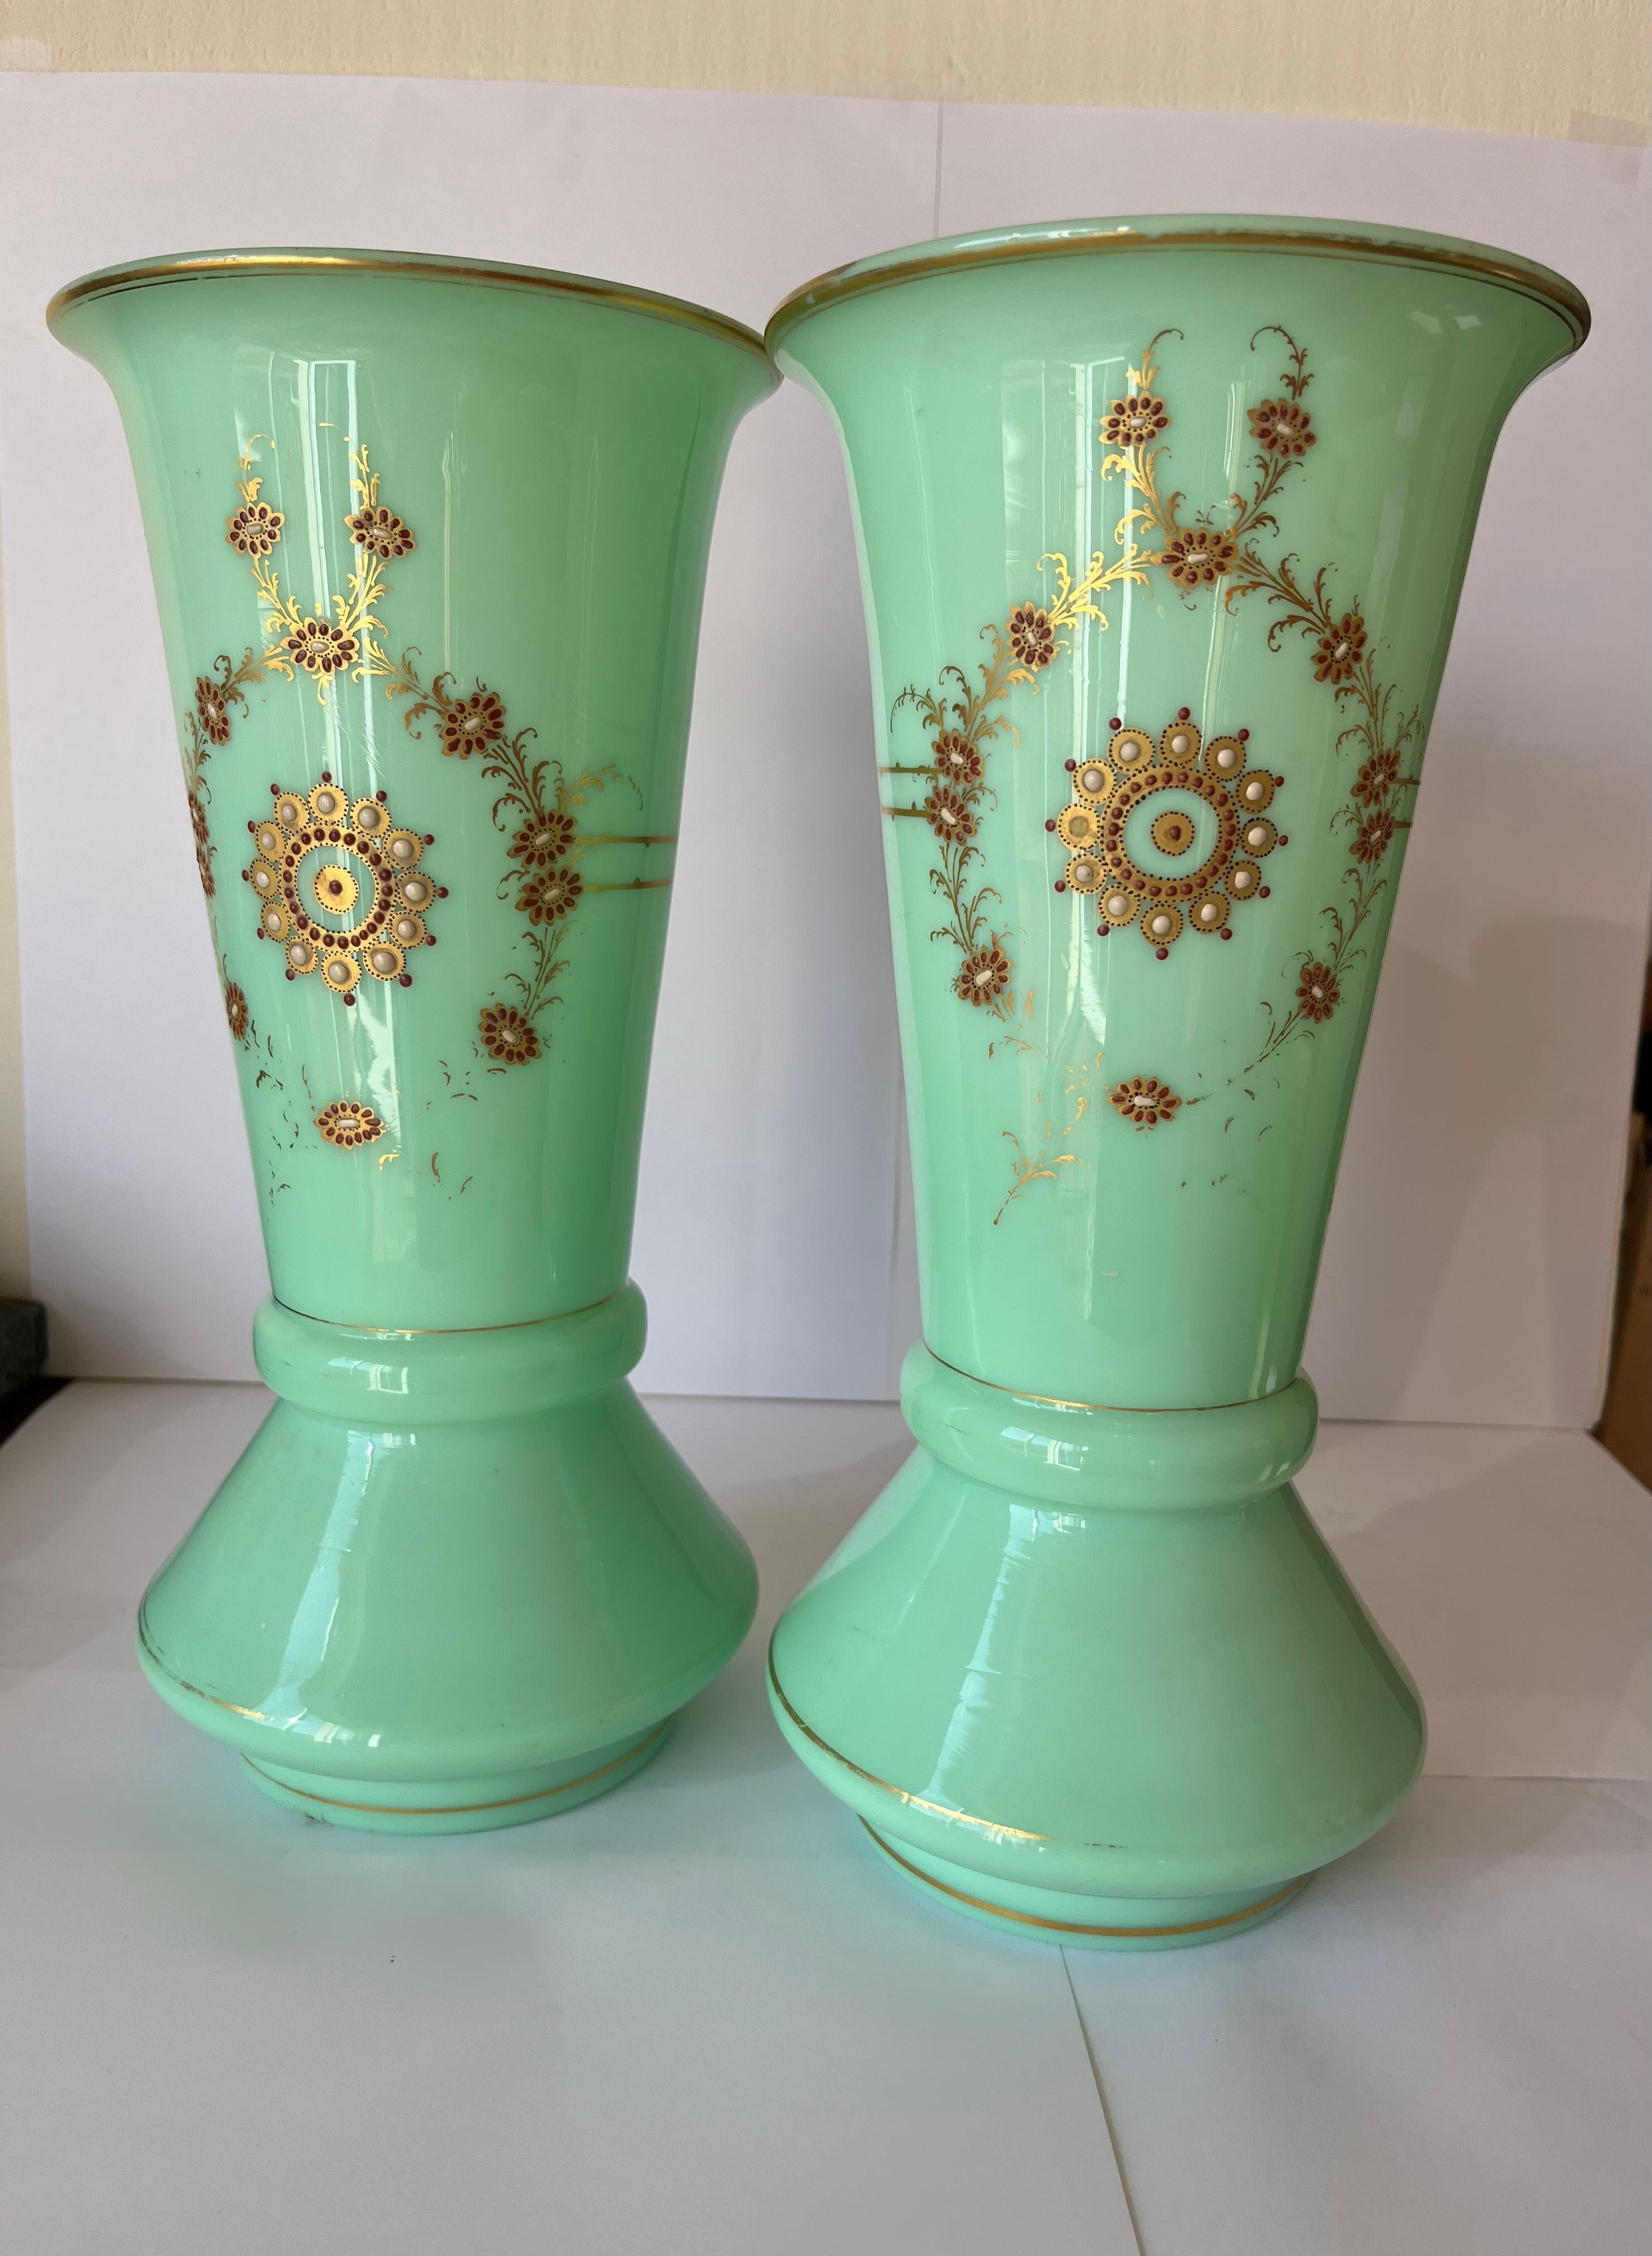 Pair of Ligh Green Opaline Glass Charlesx 1870 Vases Gold and Dark Red Motifs In Good Condition For Sale In Miami, FL